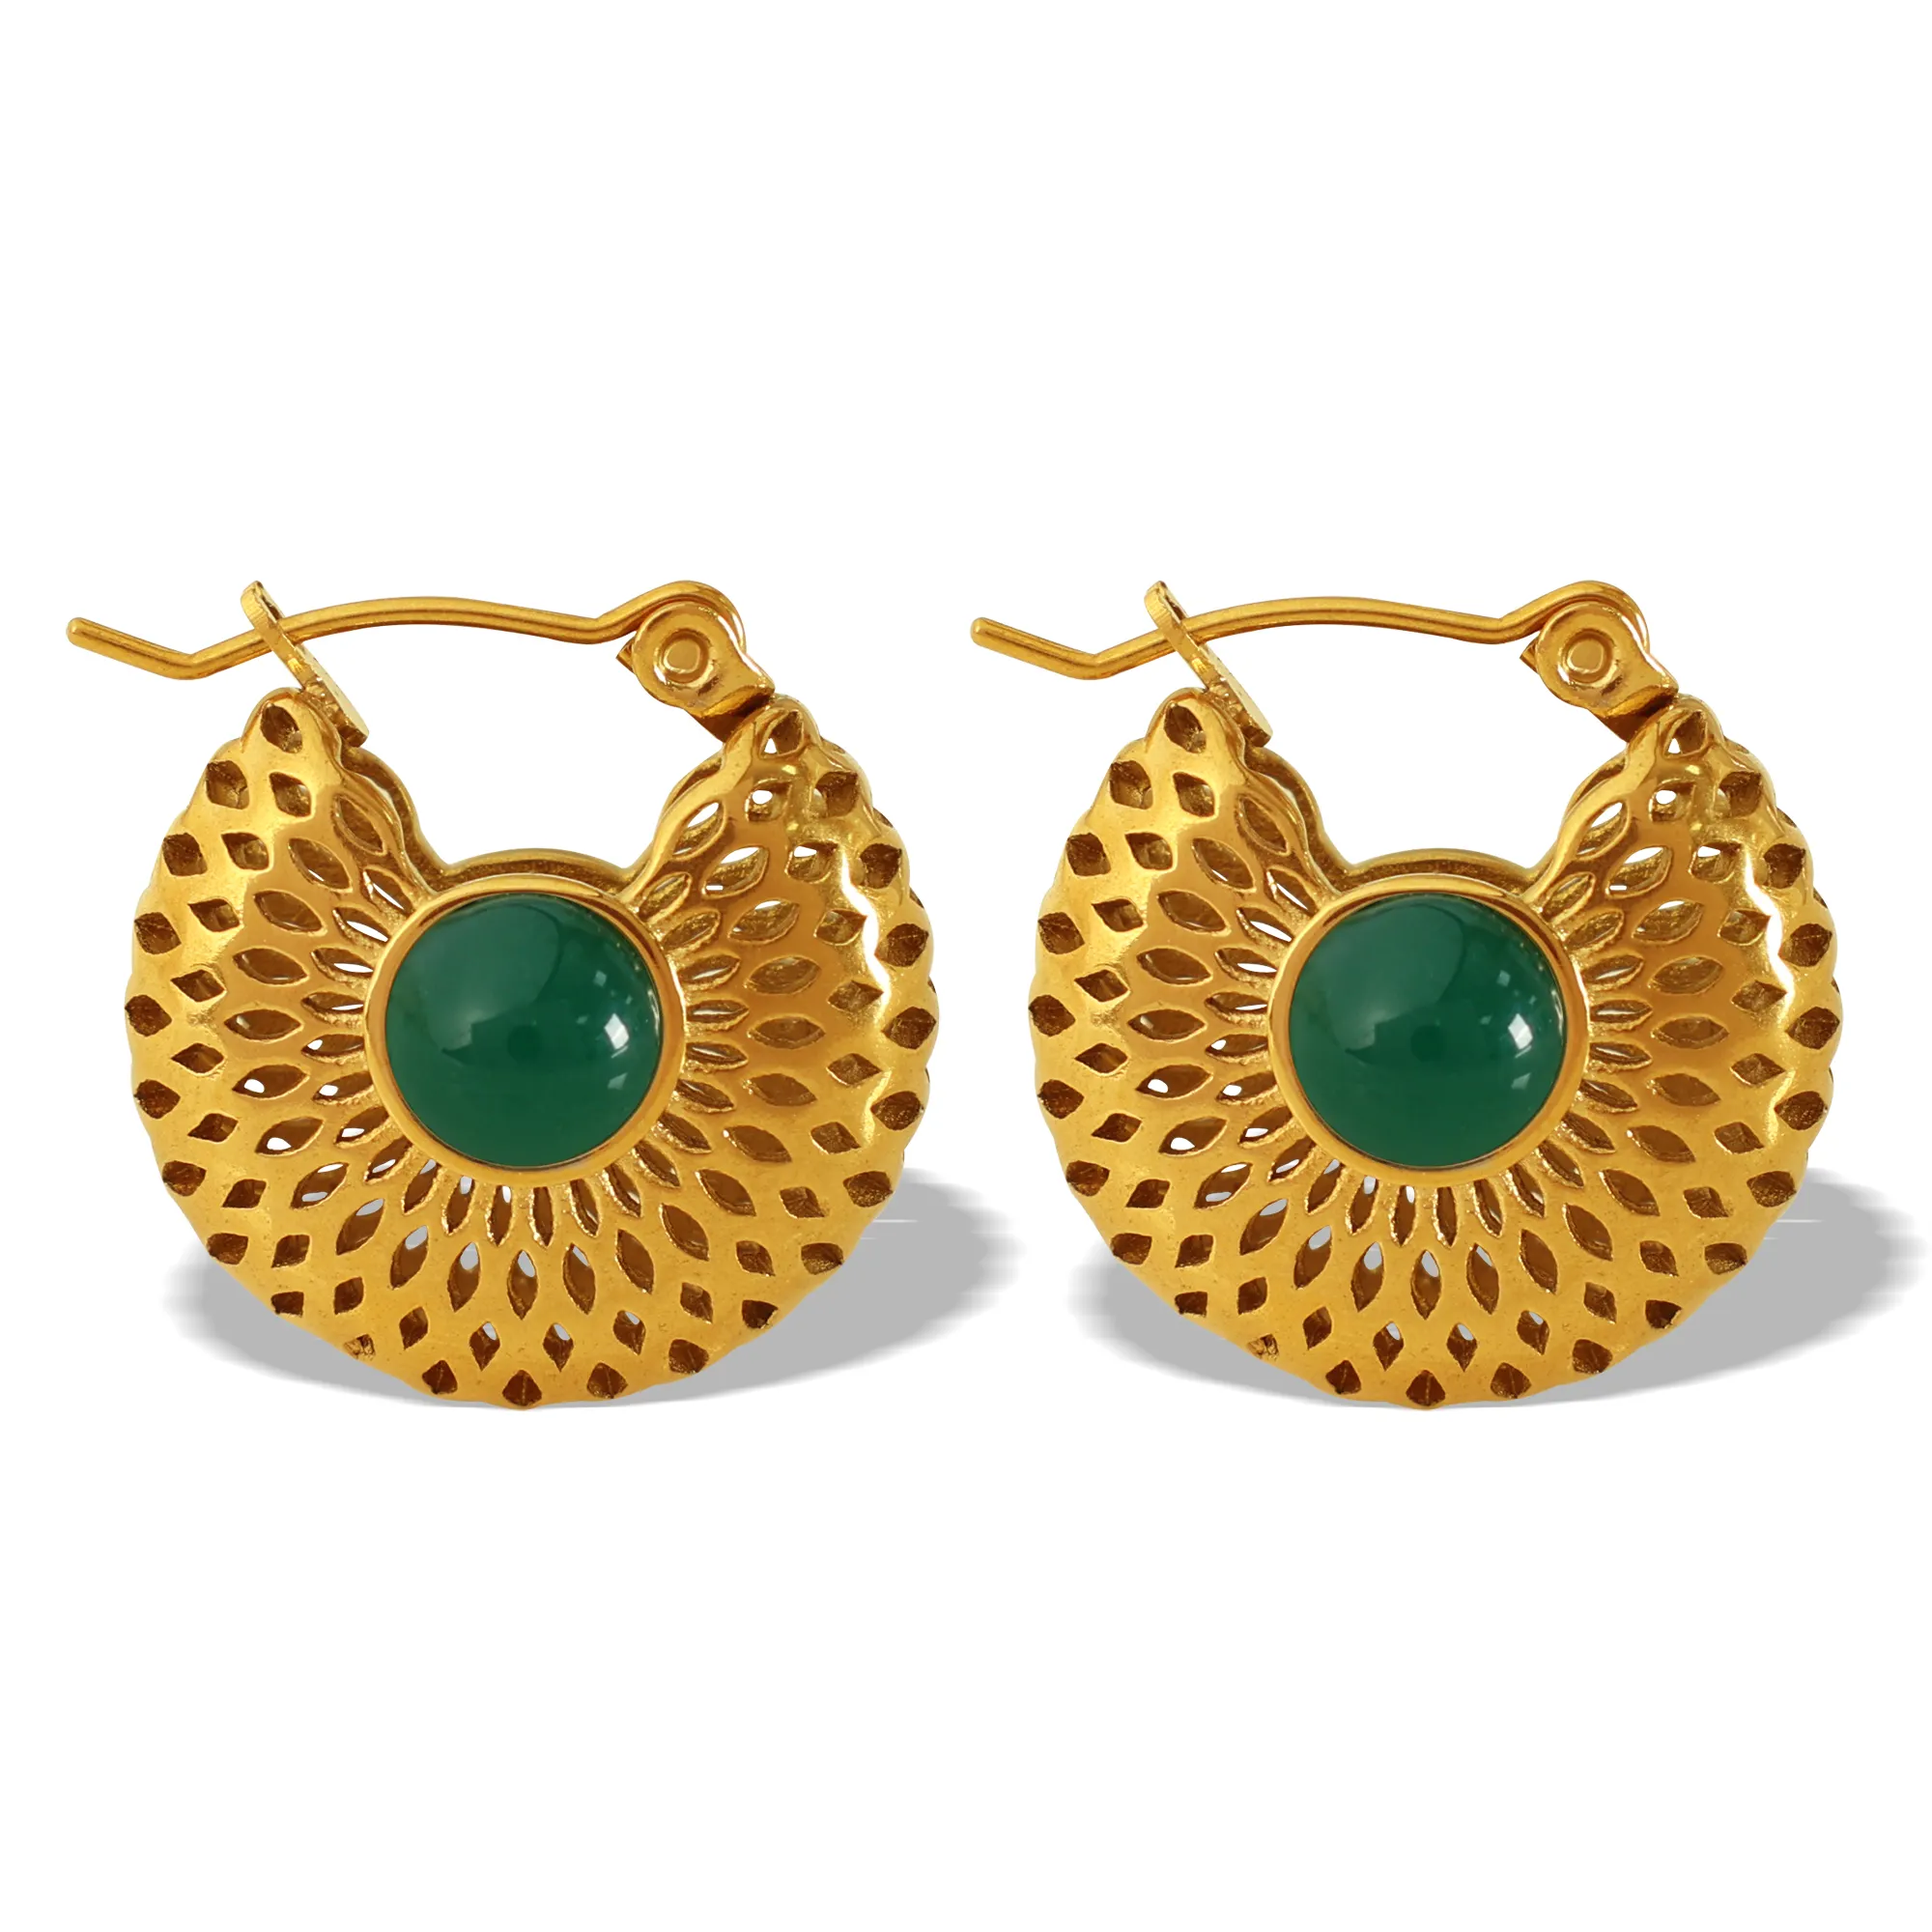 FANJIN JEWELRY EH202 High Quality Cheap Price Vintage mausoleum Hollowed Out Gold Earrings Earrings